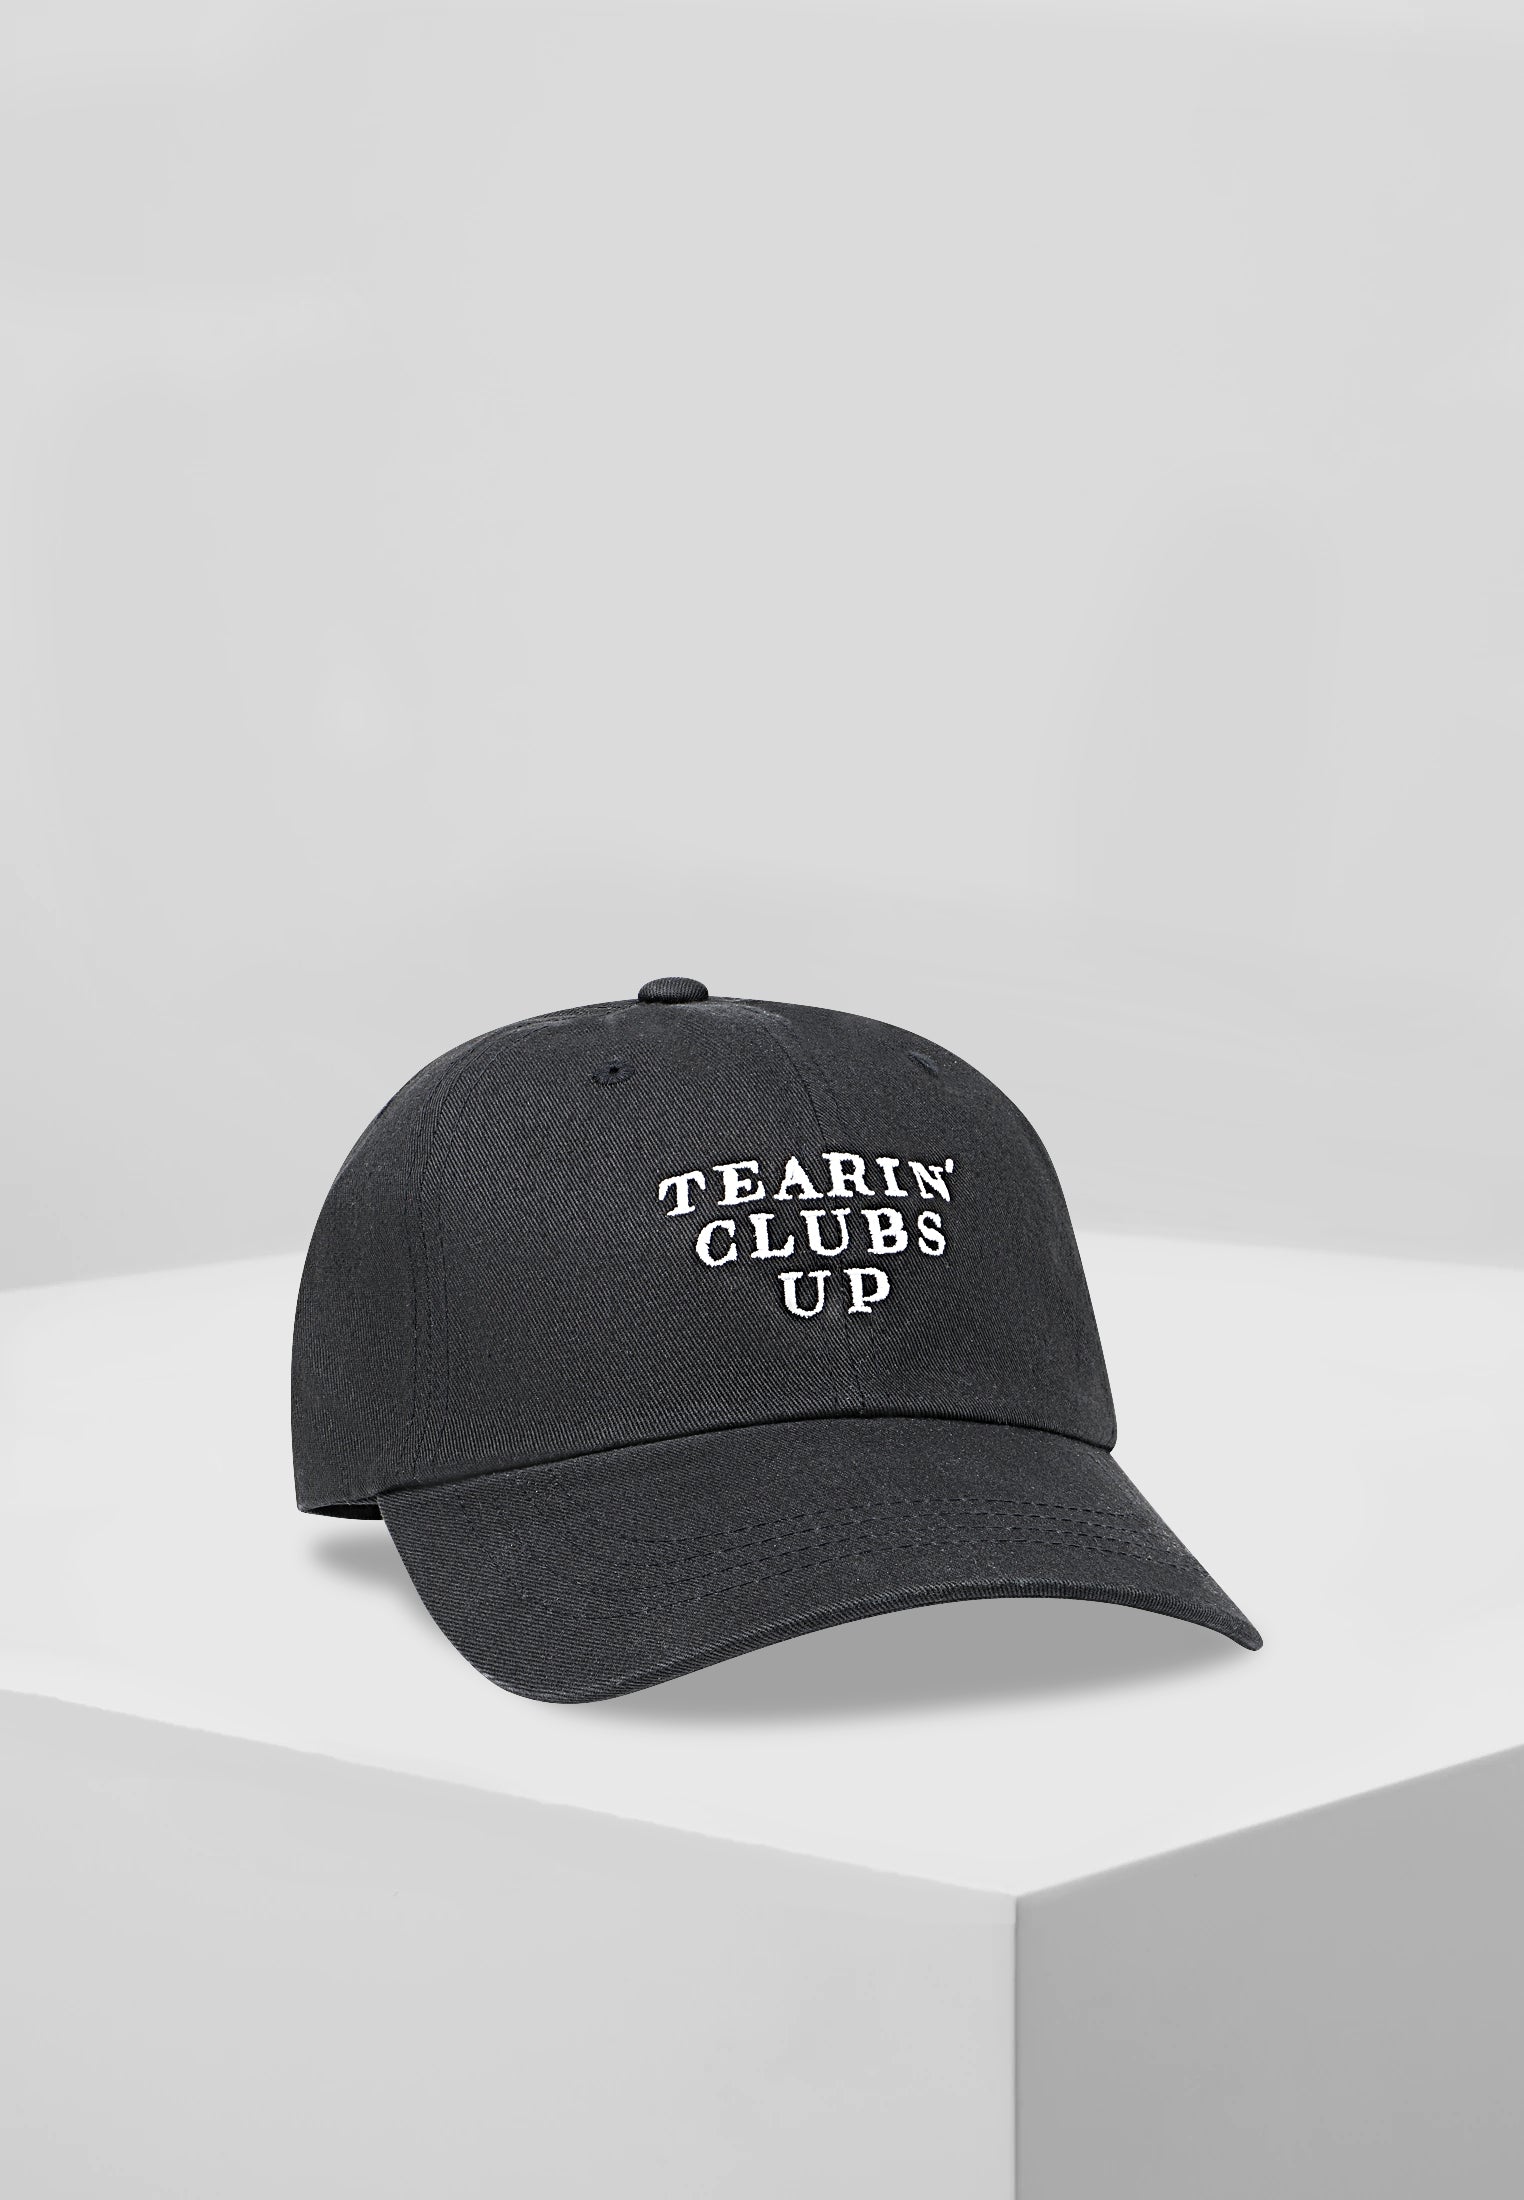 TEARIN' CLUBS UP HAT IN BLACK